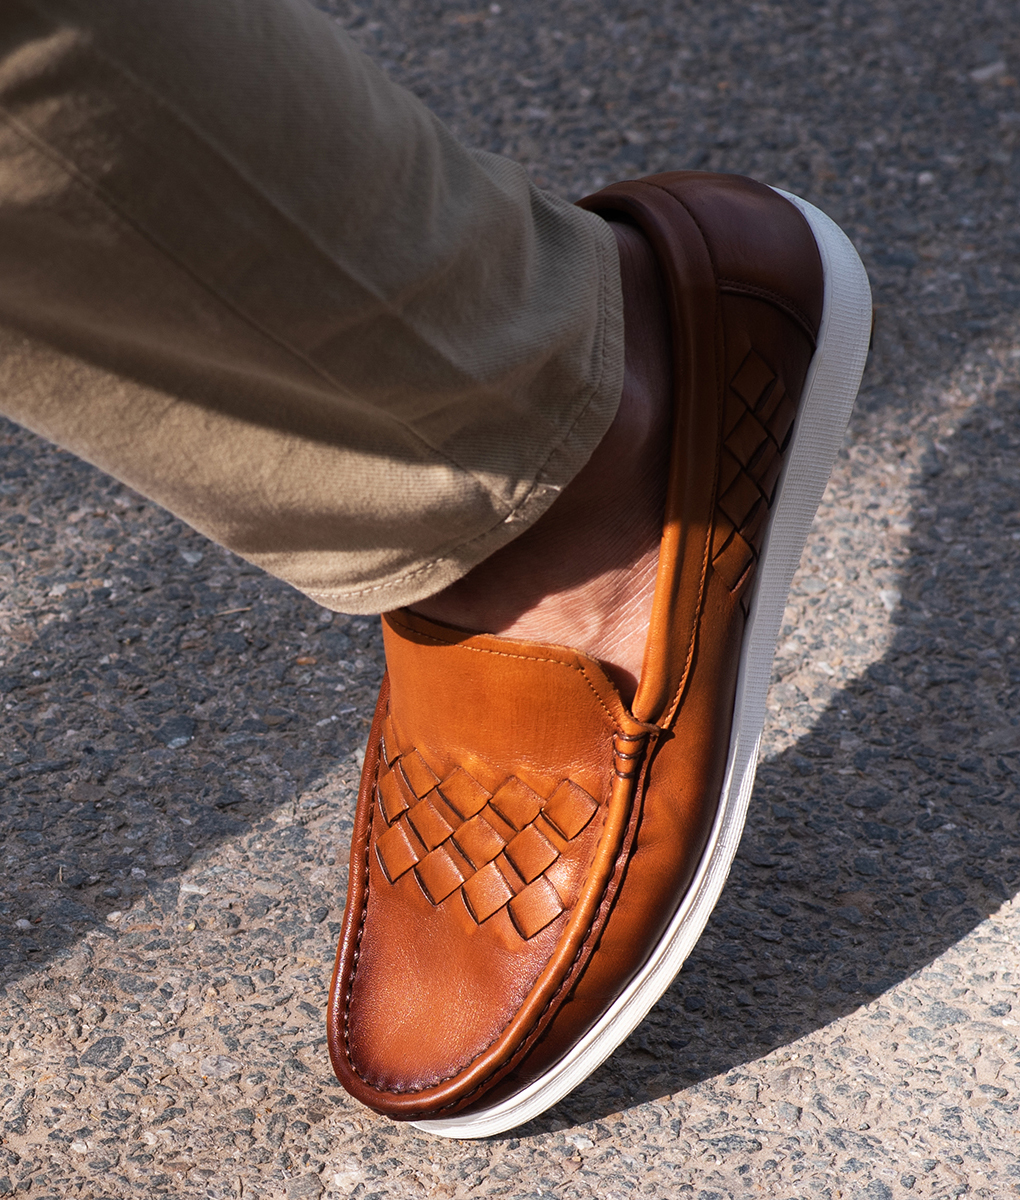 Turkey Made Brown Leather Shoes for Men